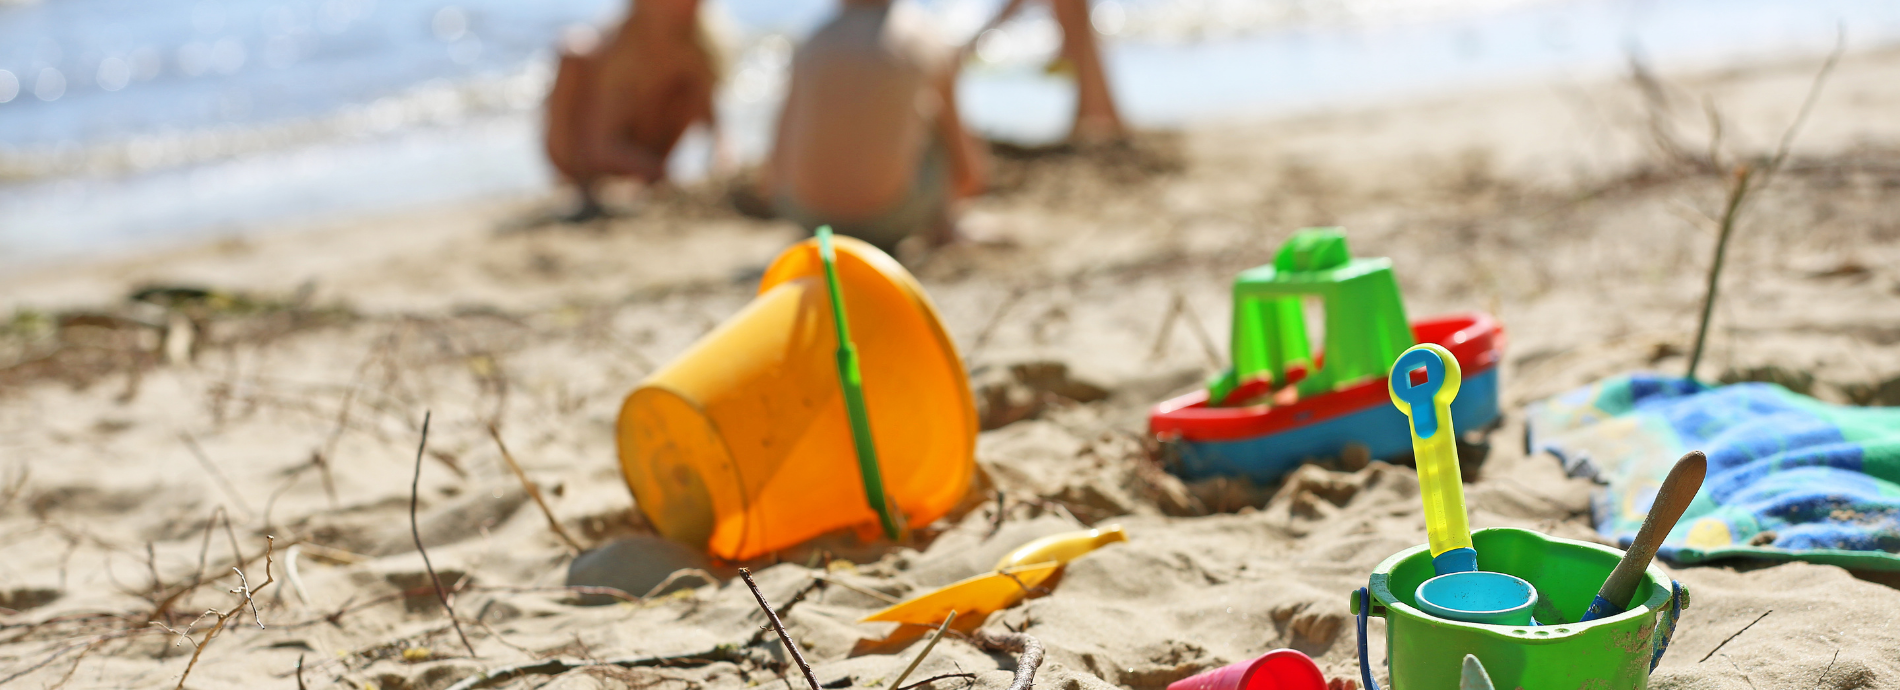 beach with sand buckets and children's toys